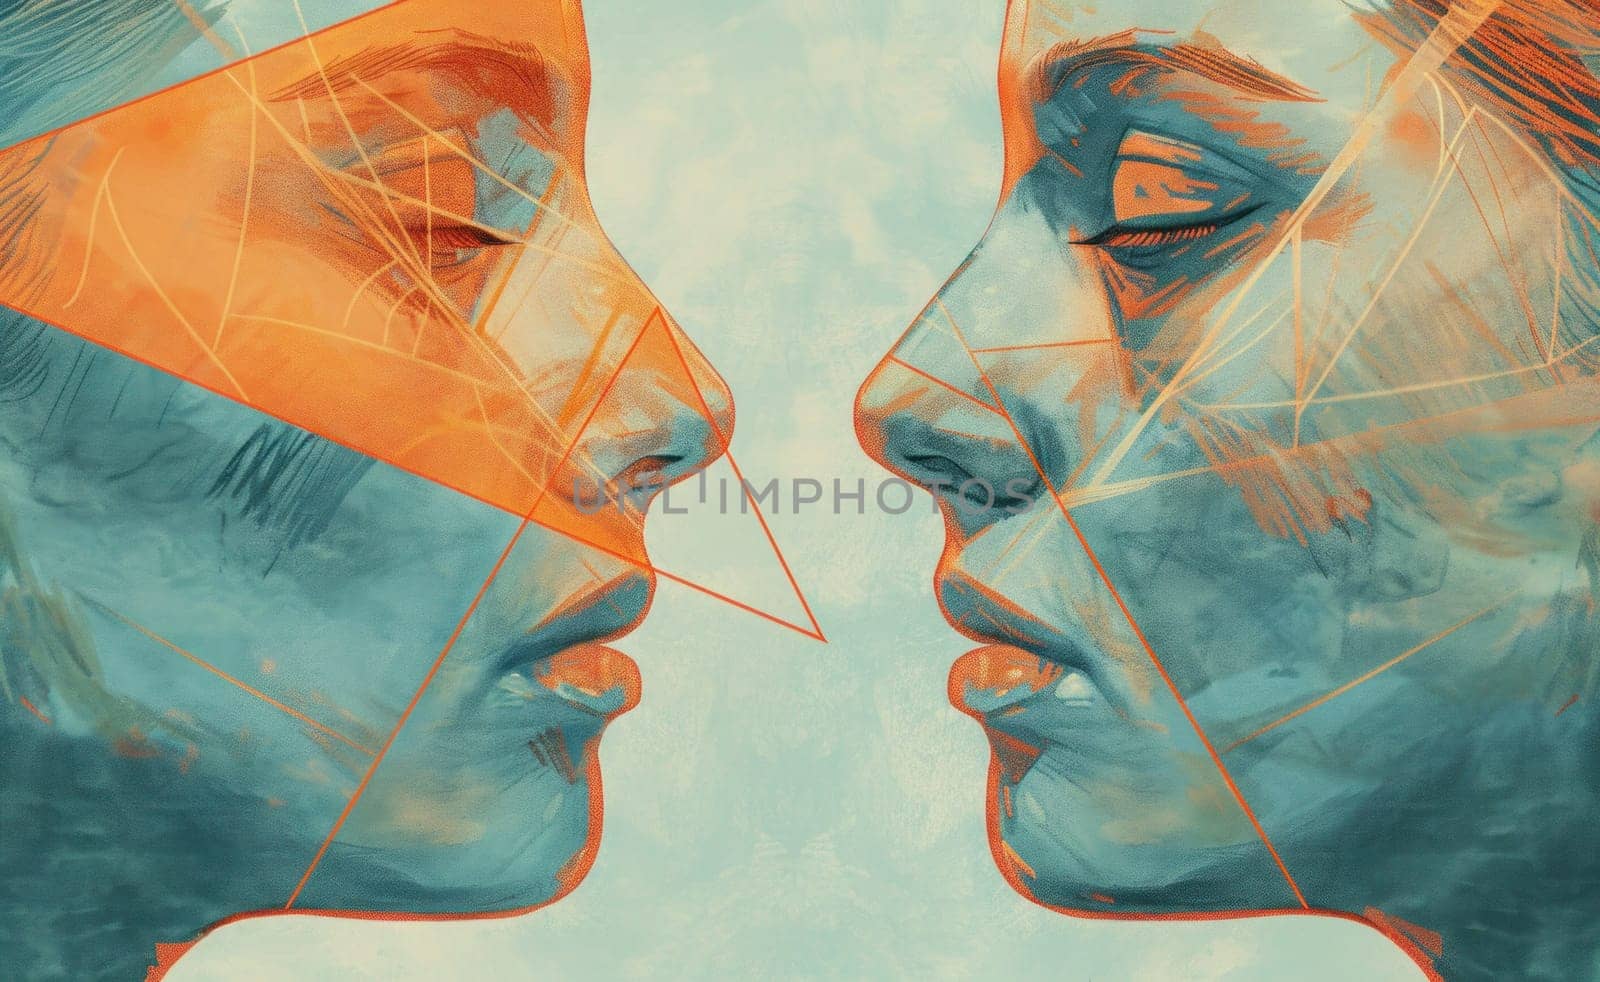 Connection and contemplation two people facing each other against a blue and orange background